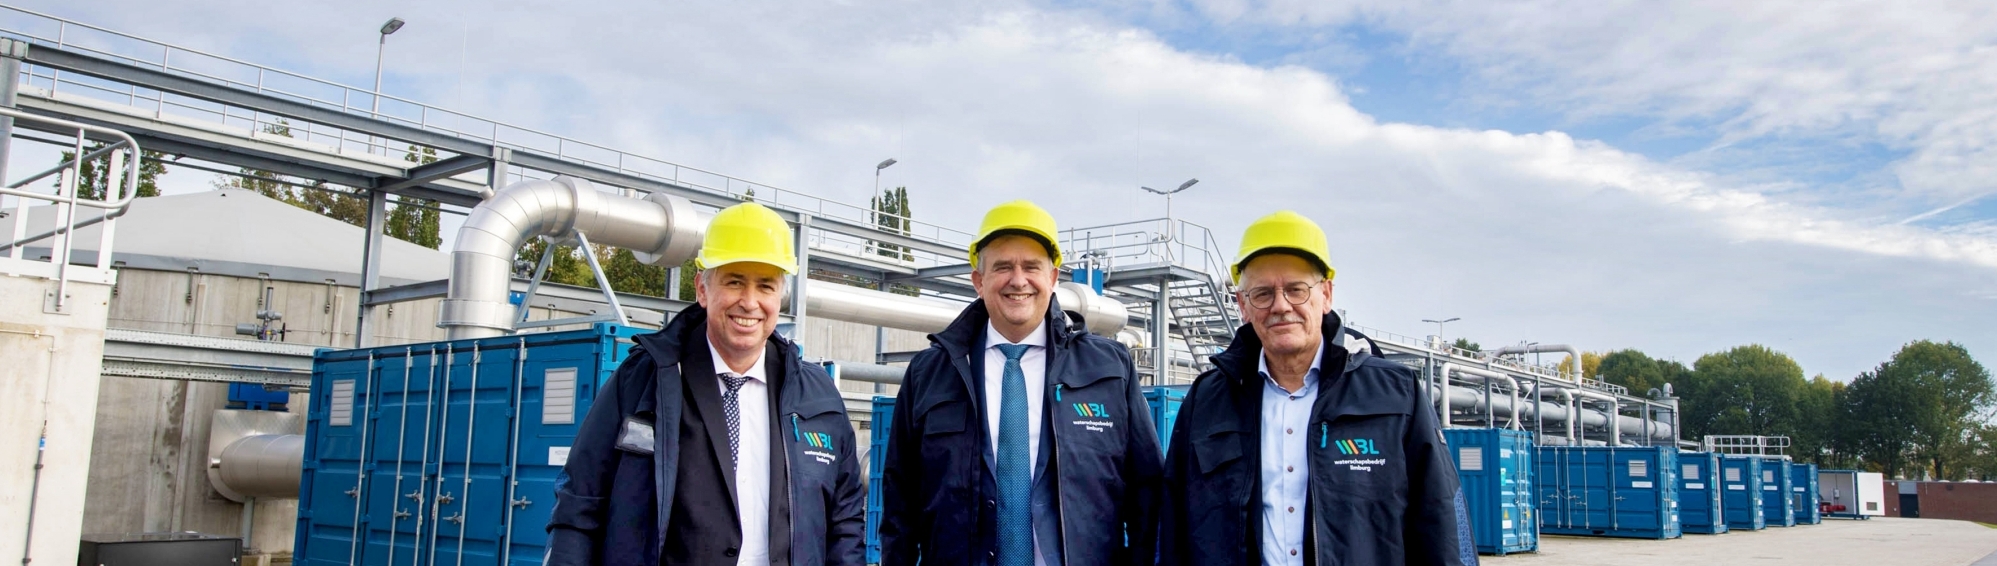 Duurzame rioolwaterzuivering in Panheel geopend